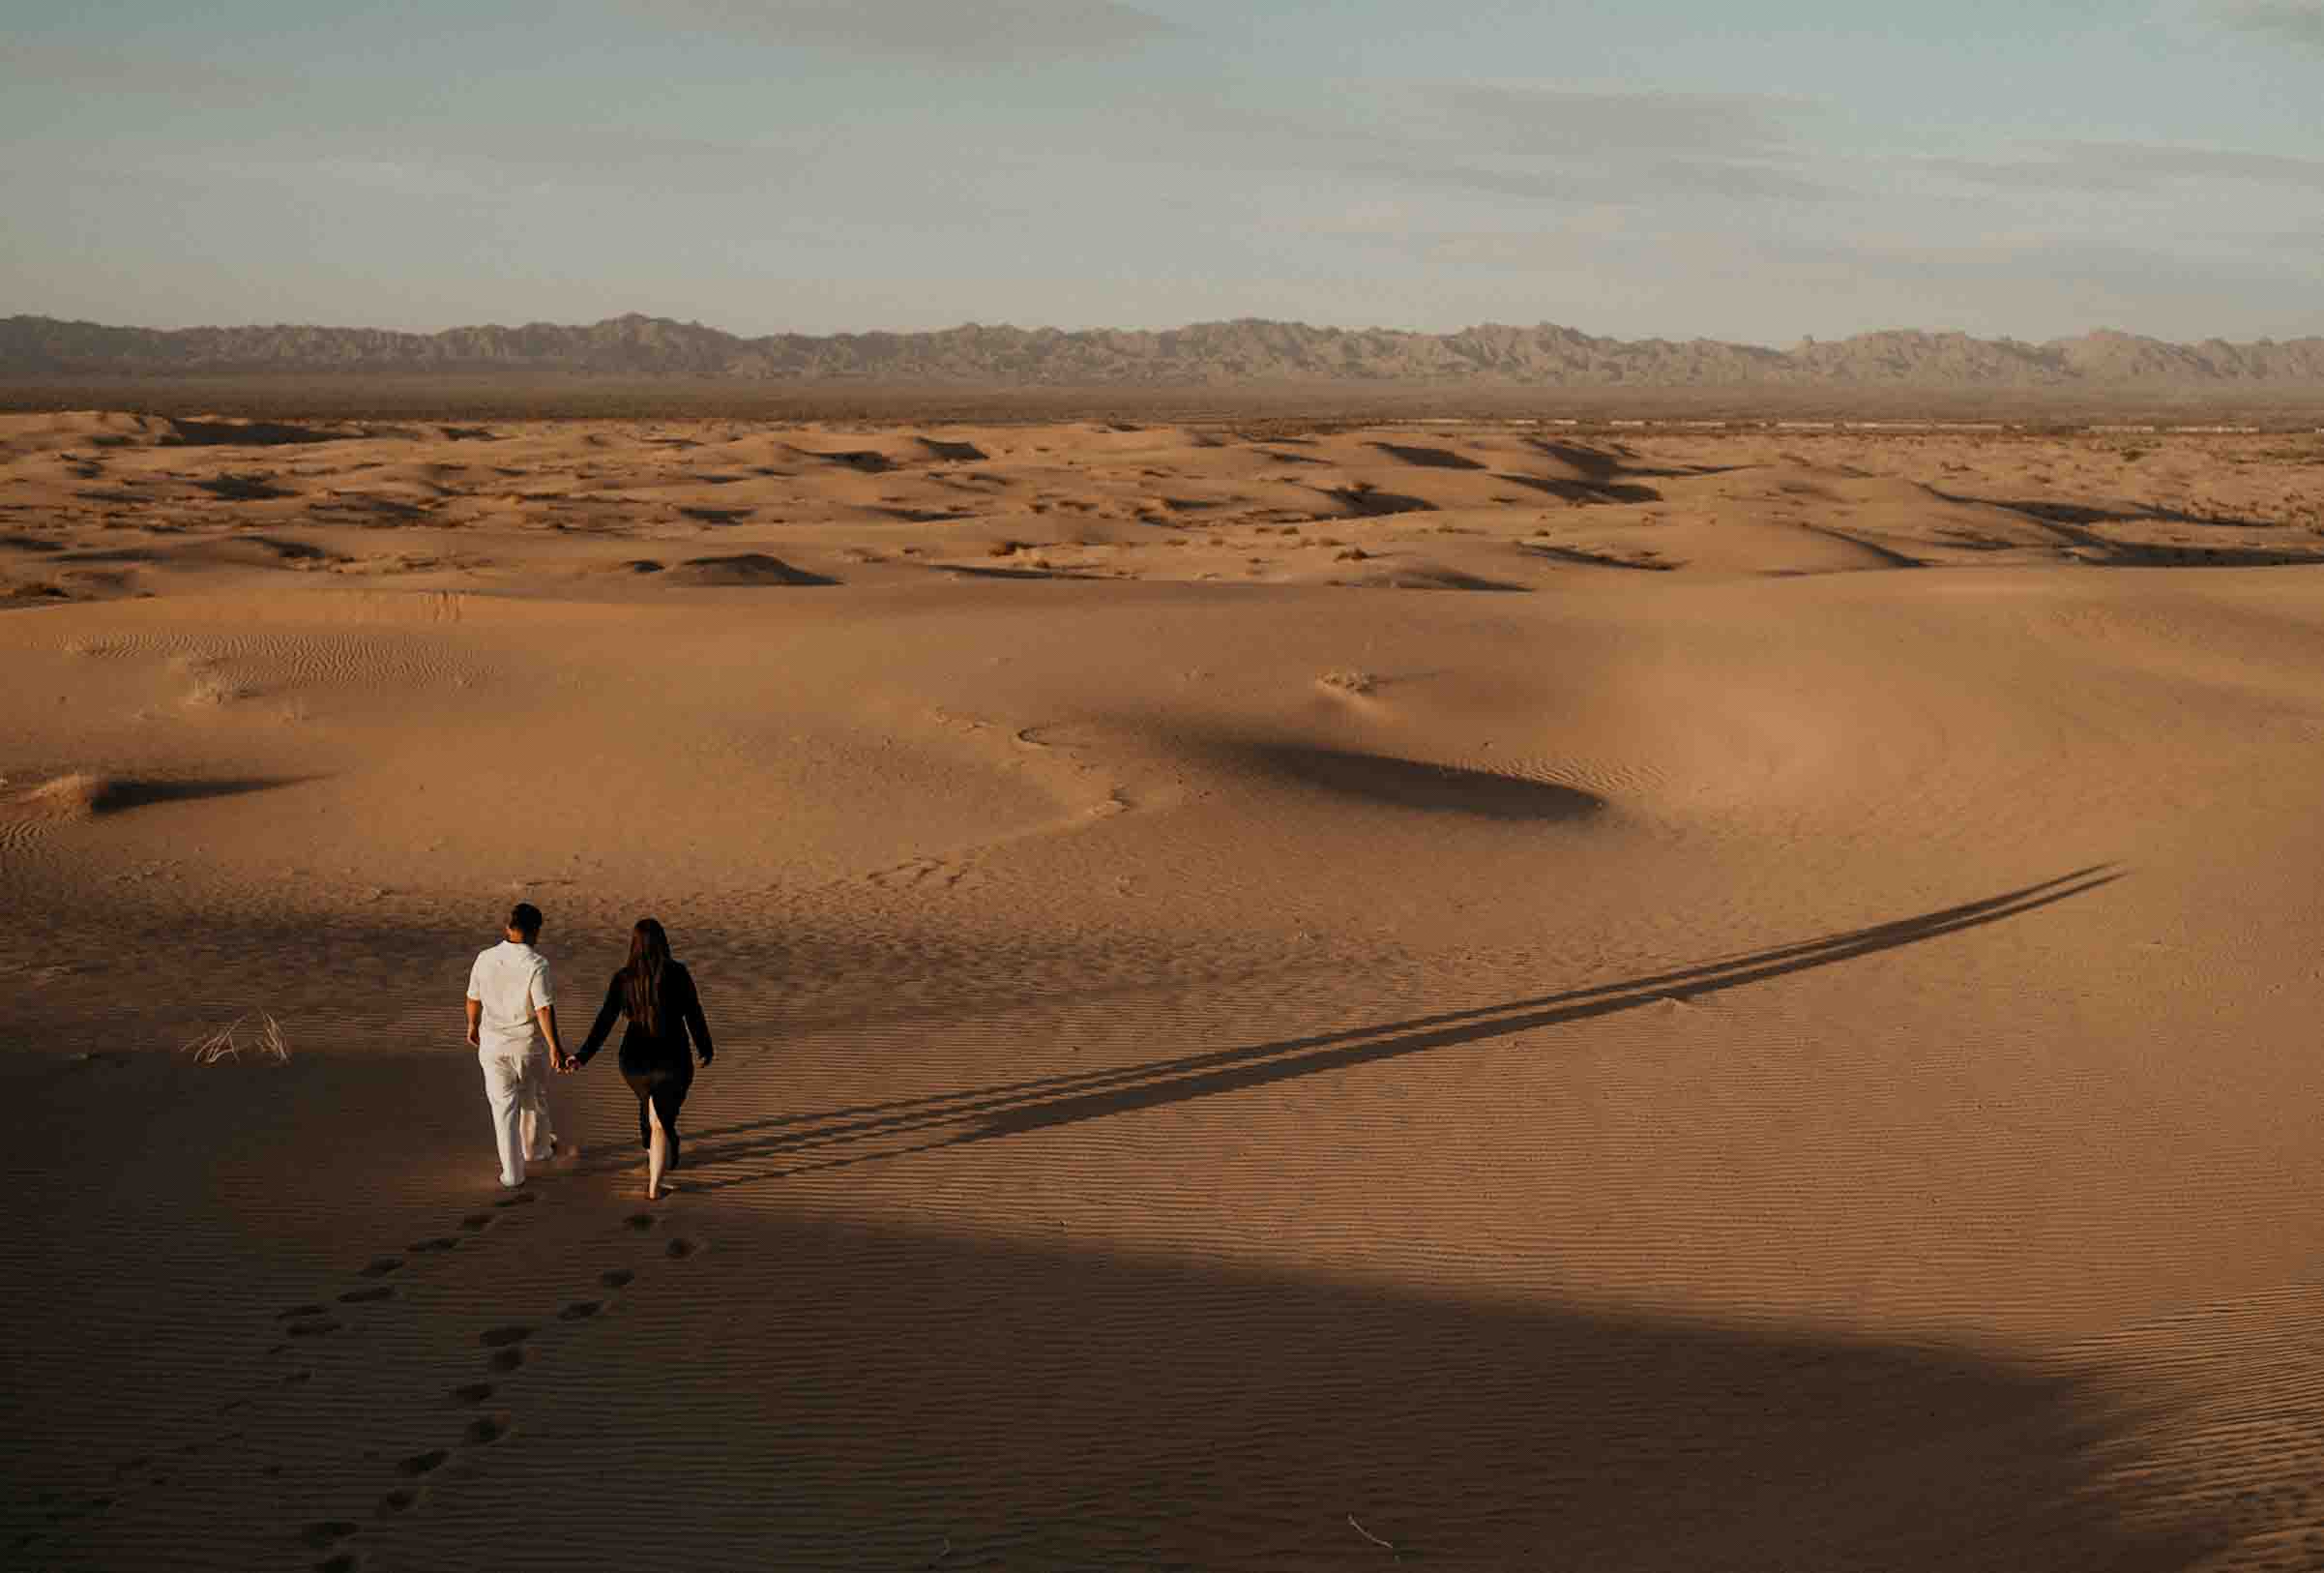 The couple walks hand-in-hand with long shadows at the Imperial Sand Dunes.